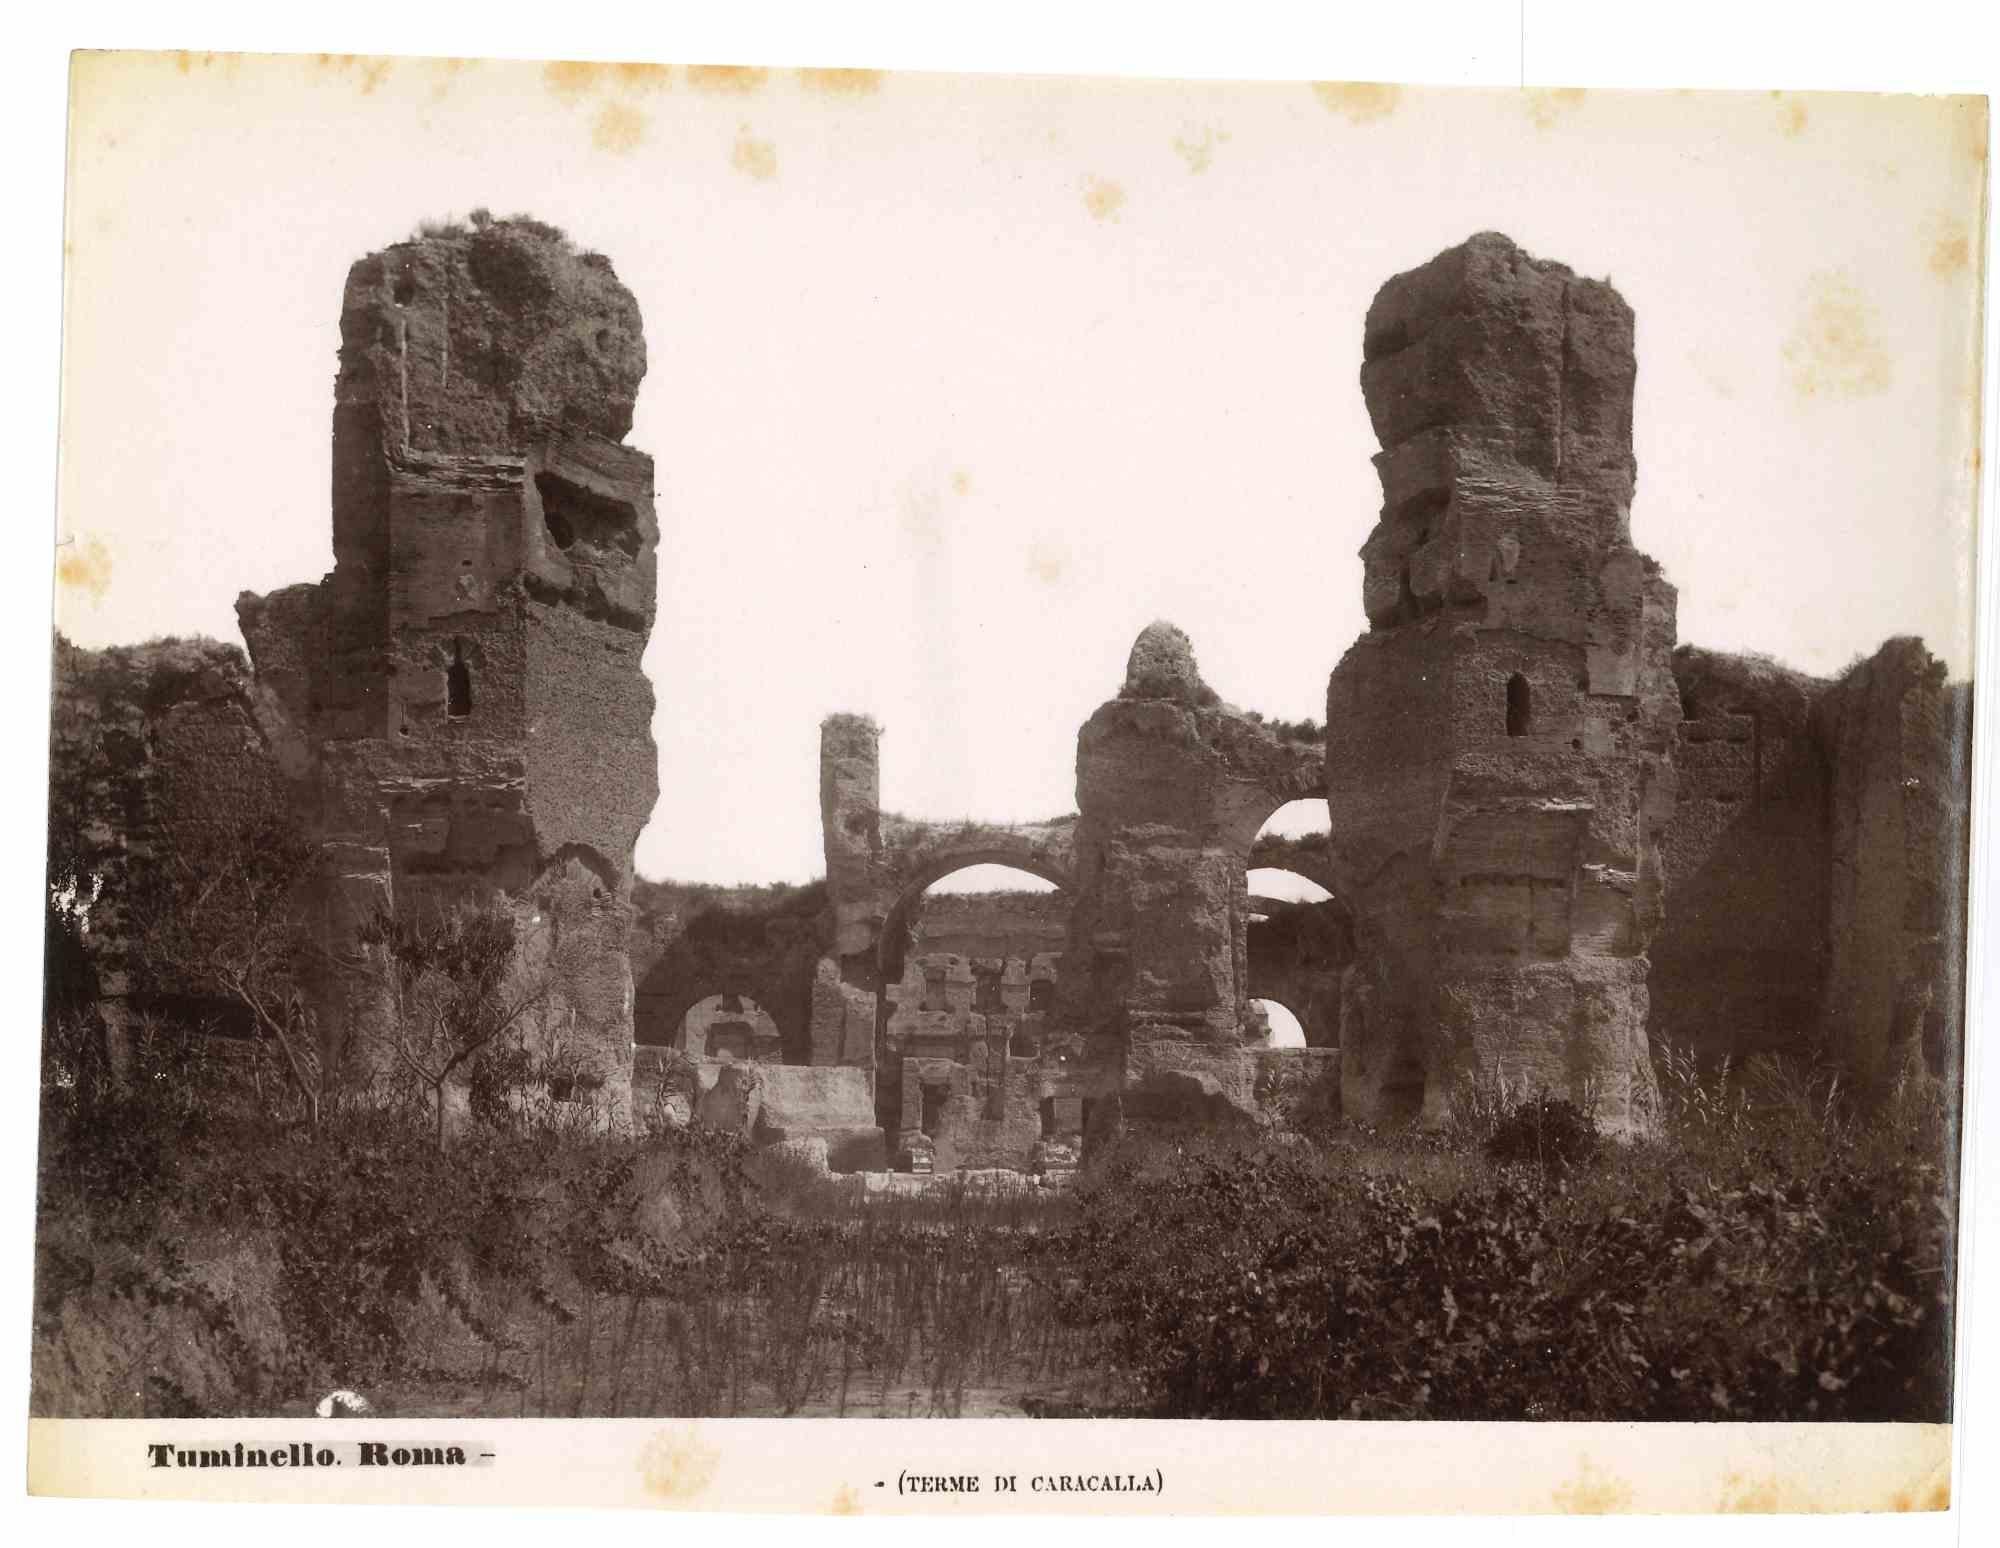 Baths of Caracalla - Vintage Photo by Ludovico Tuminello - Early 20th Century